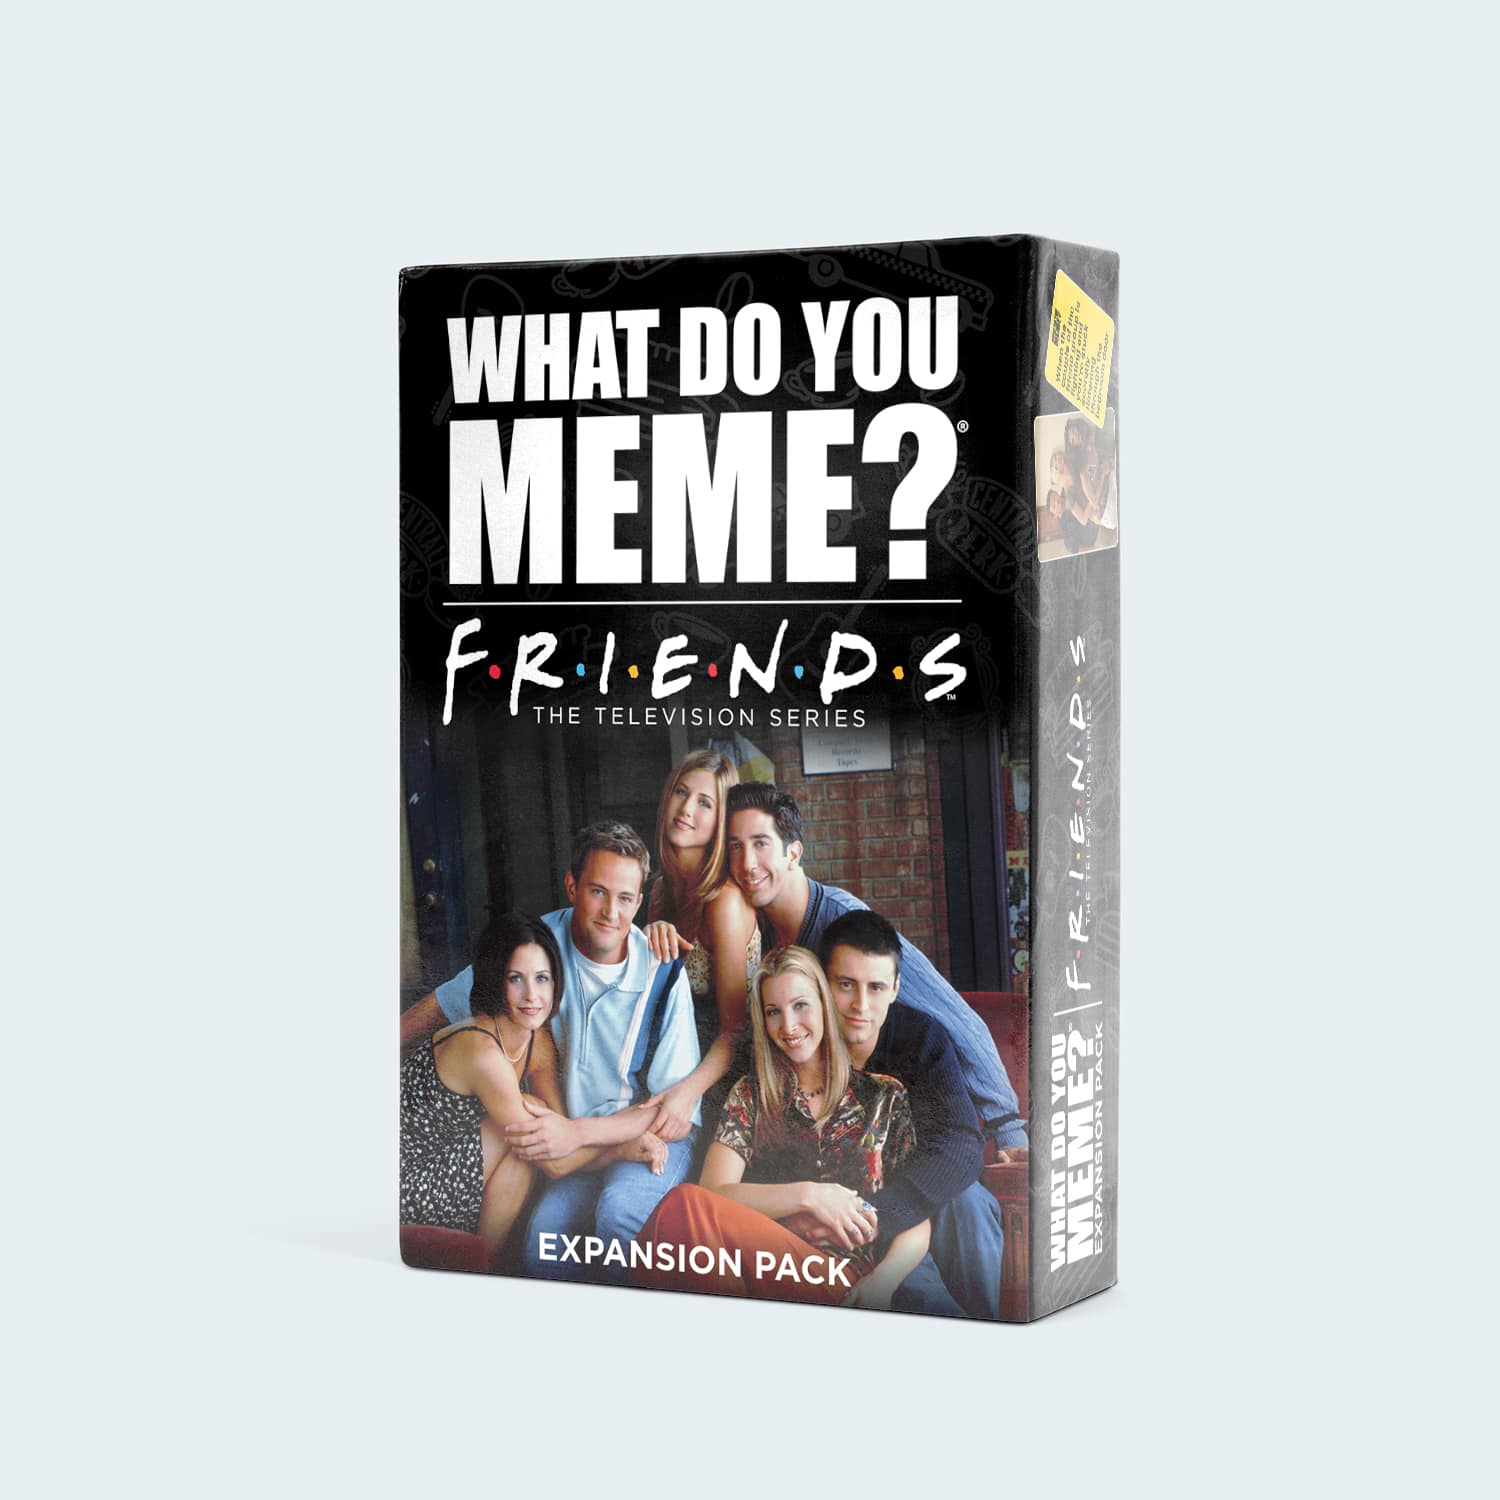 what-do-you-meme-friends-expansion-pack-game-box-and-game-play-03-what-do-you-meme-by-relatable